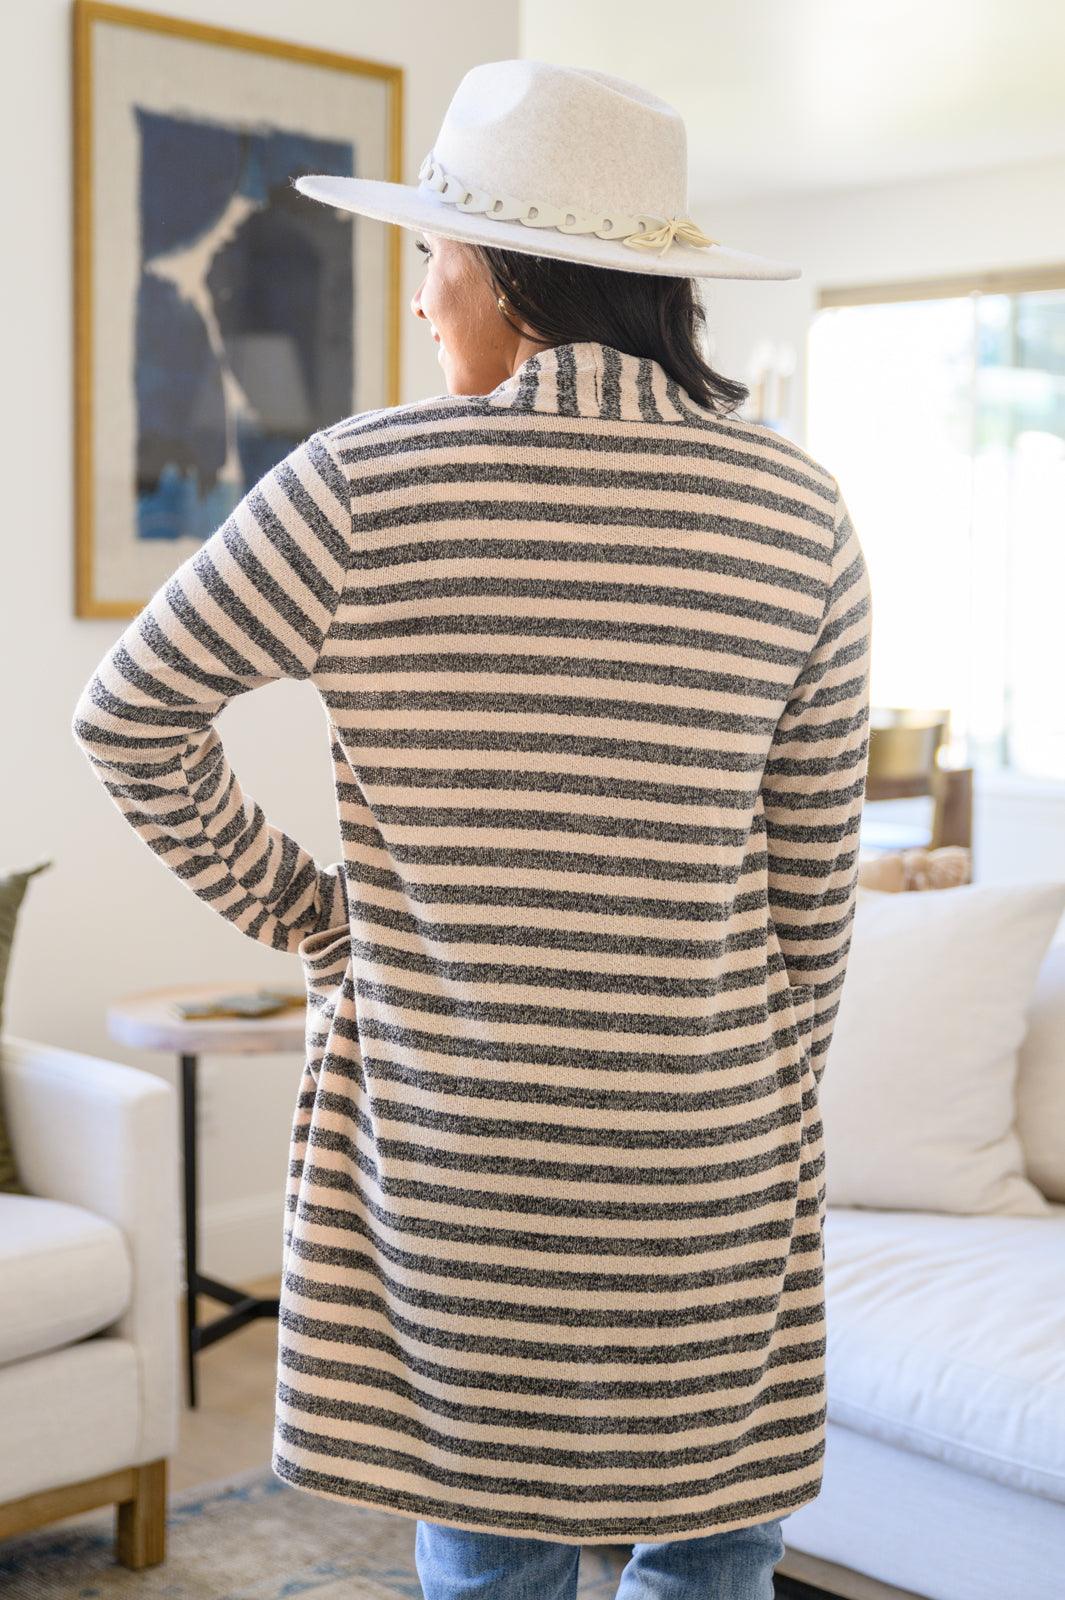 What's Mine Is Yours Striped Cardigan - The Fiery Jasmine